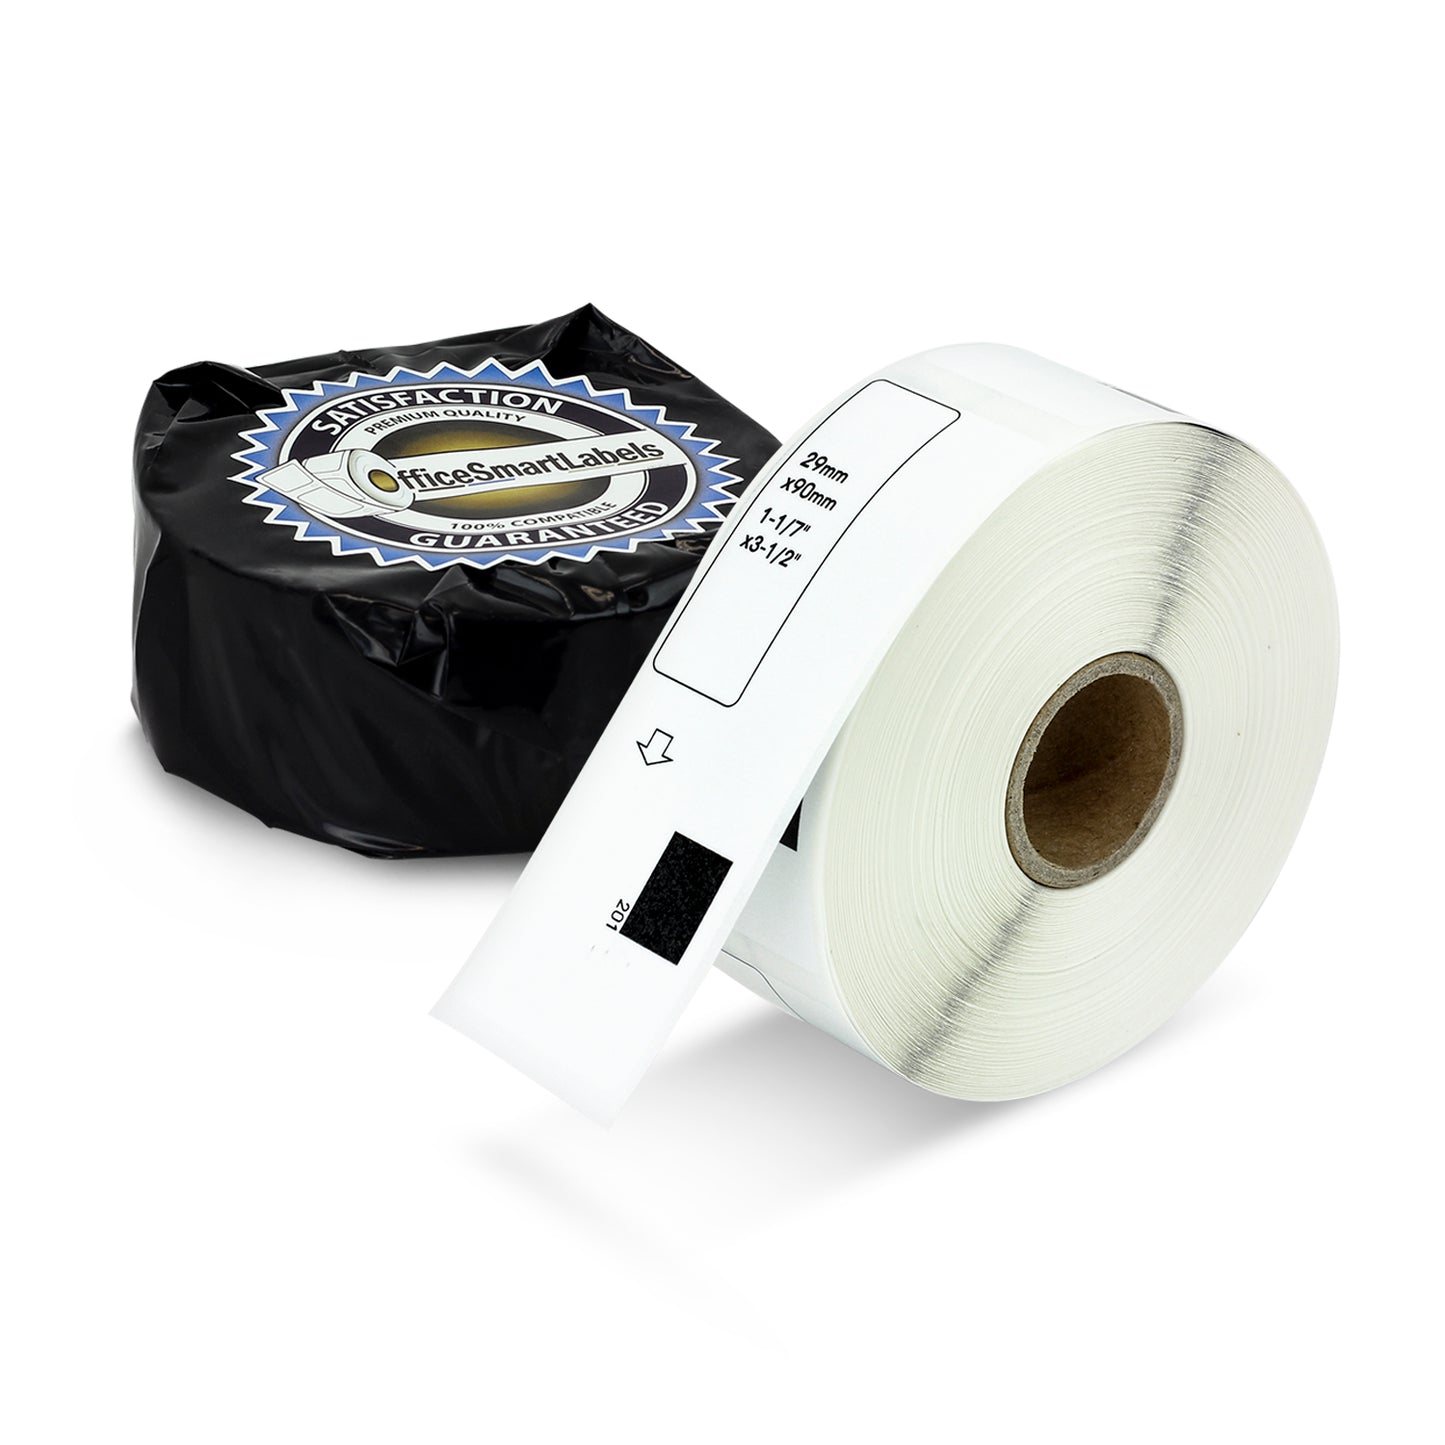 1-1/7 x 3-1/2 inch | Brother DK-1201 Compatible - 1 Roll without Cartridge